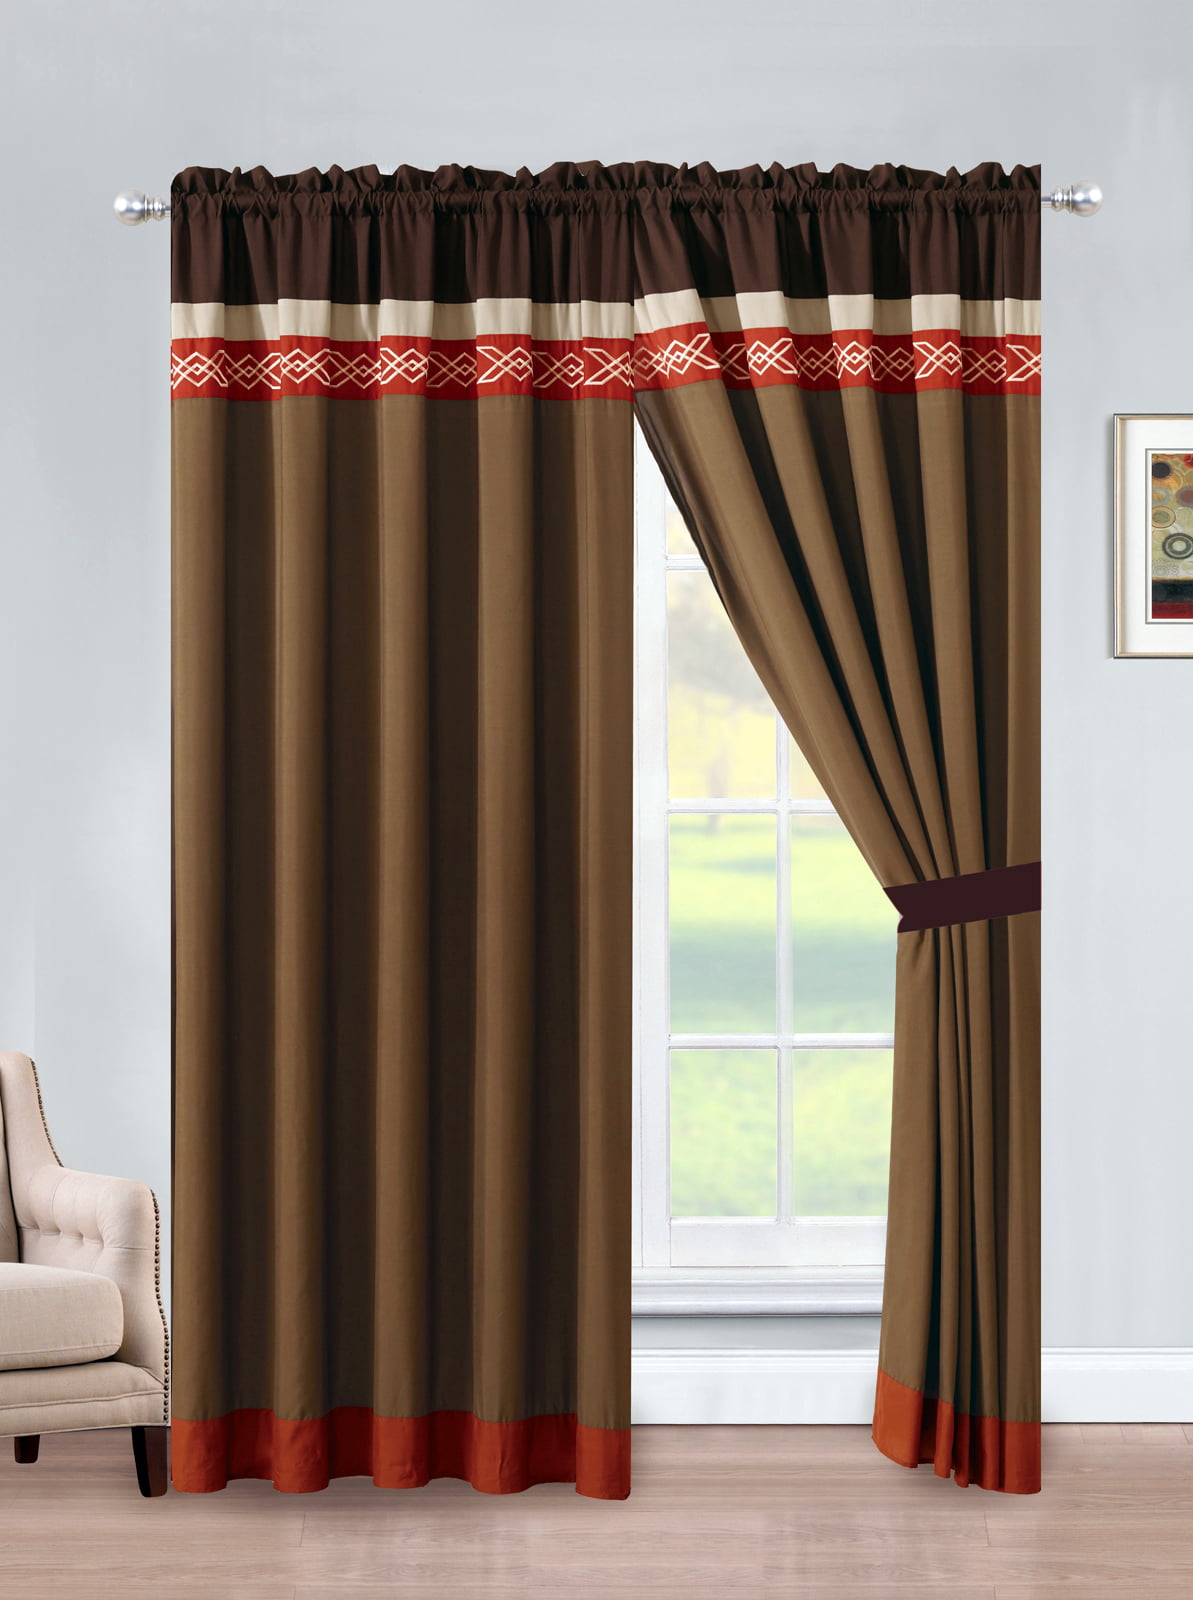 4 pc Coffee Brown Embroidered Window Curtains Panels Drapes Valance Set 84 in L 